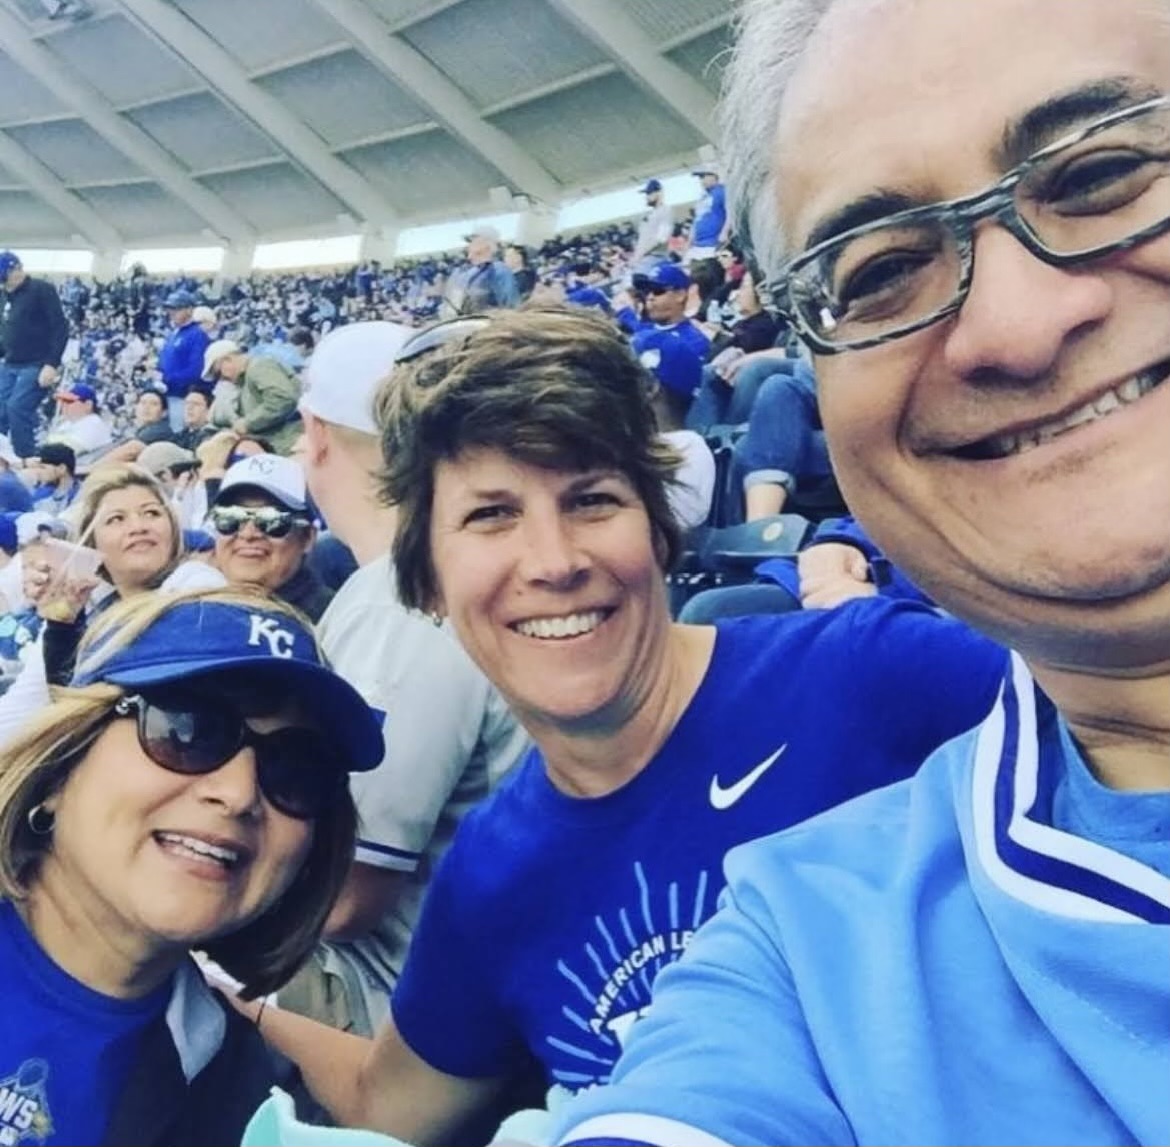 Selfie of Adriana, Jane and Andres at a Royals game